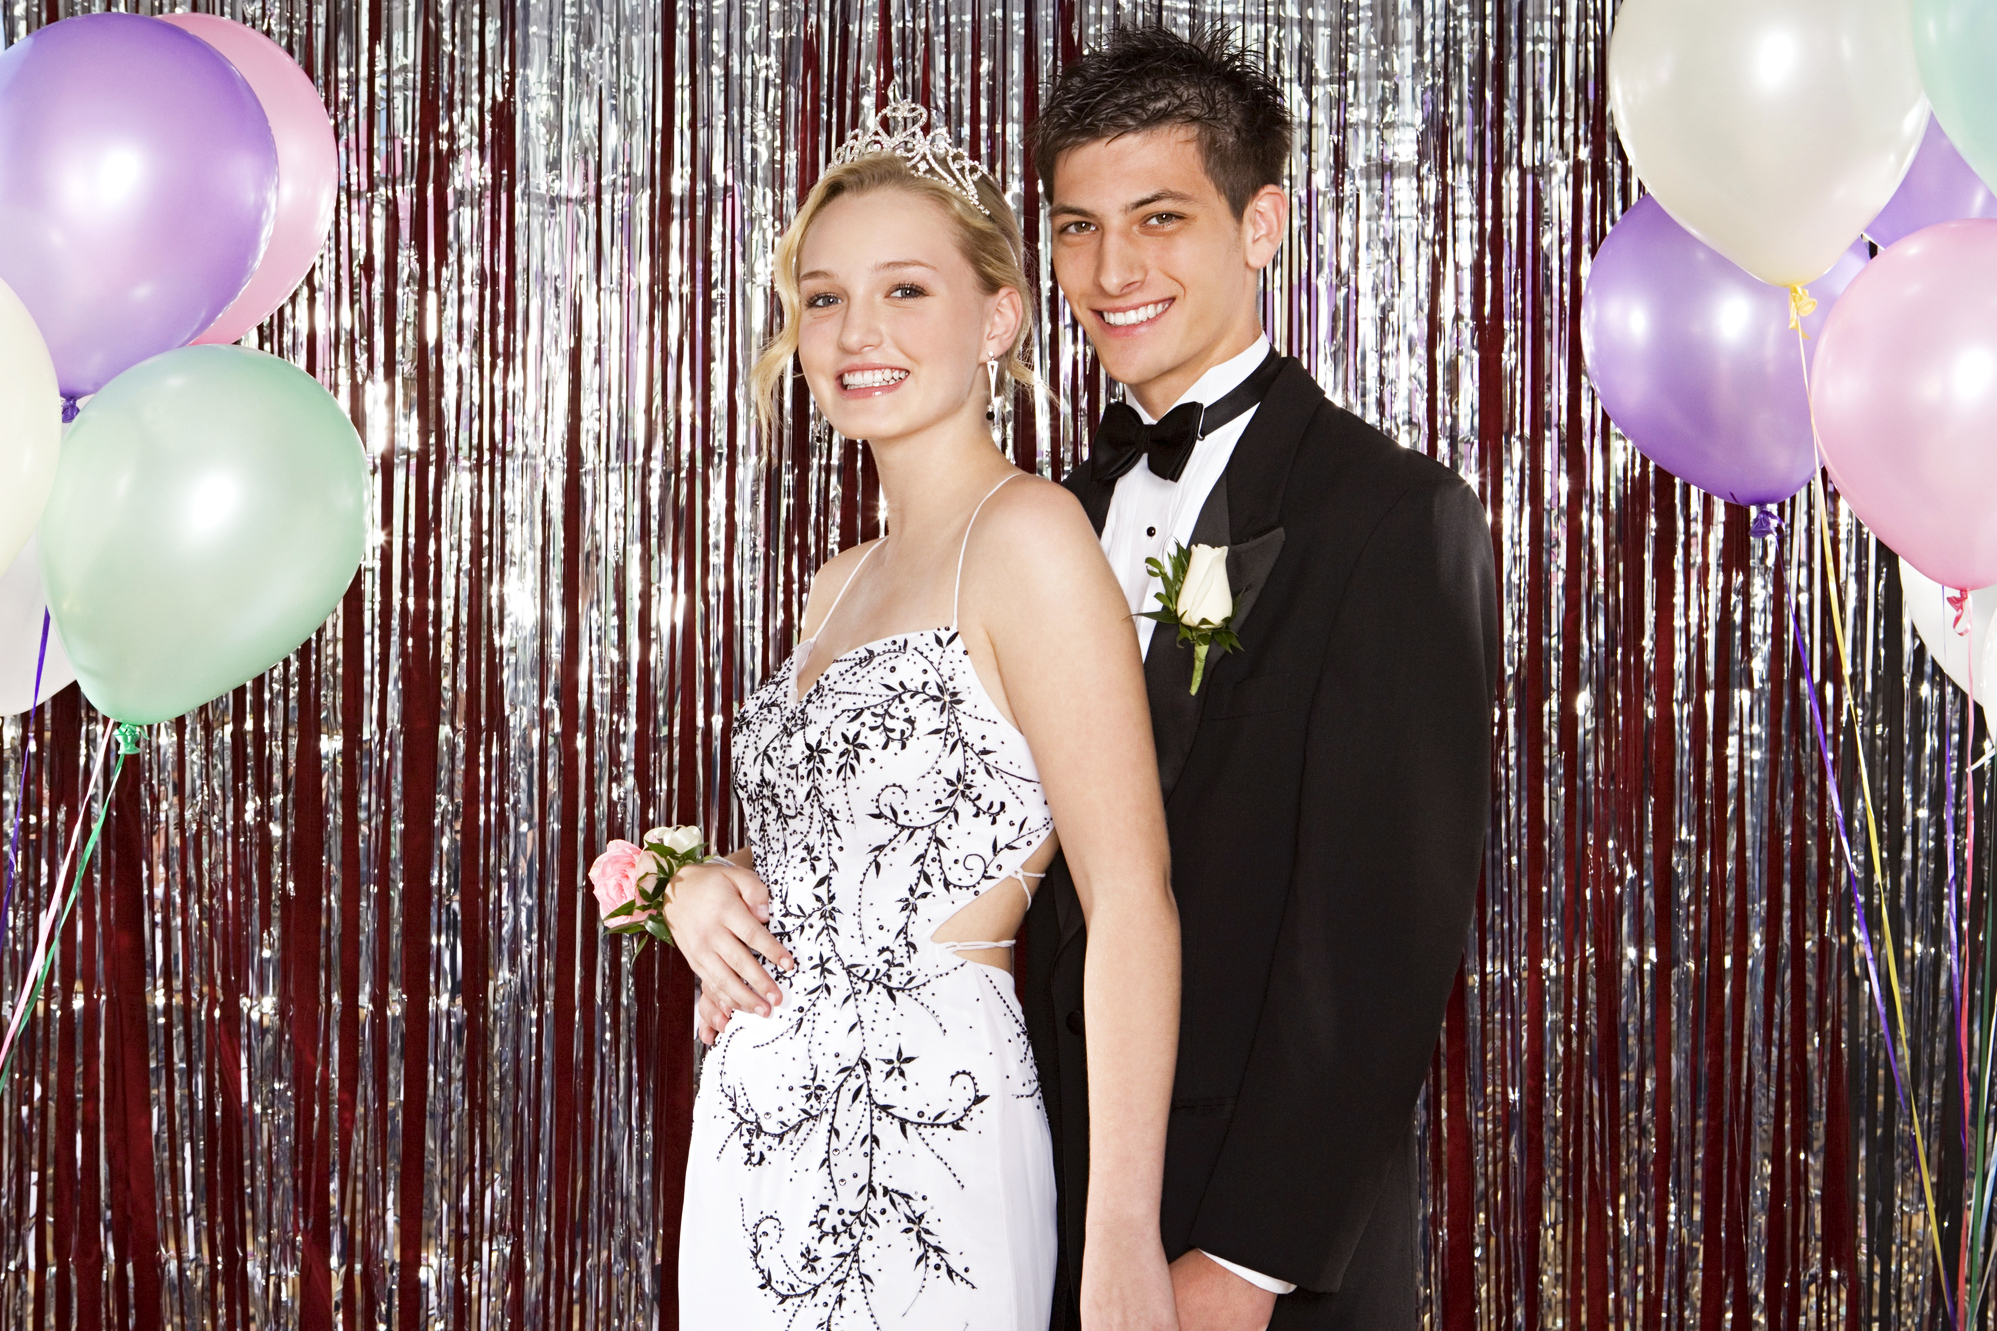 What are the activities in a prom night?